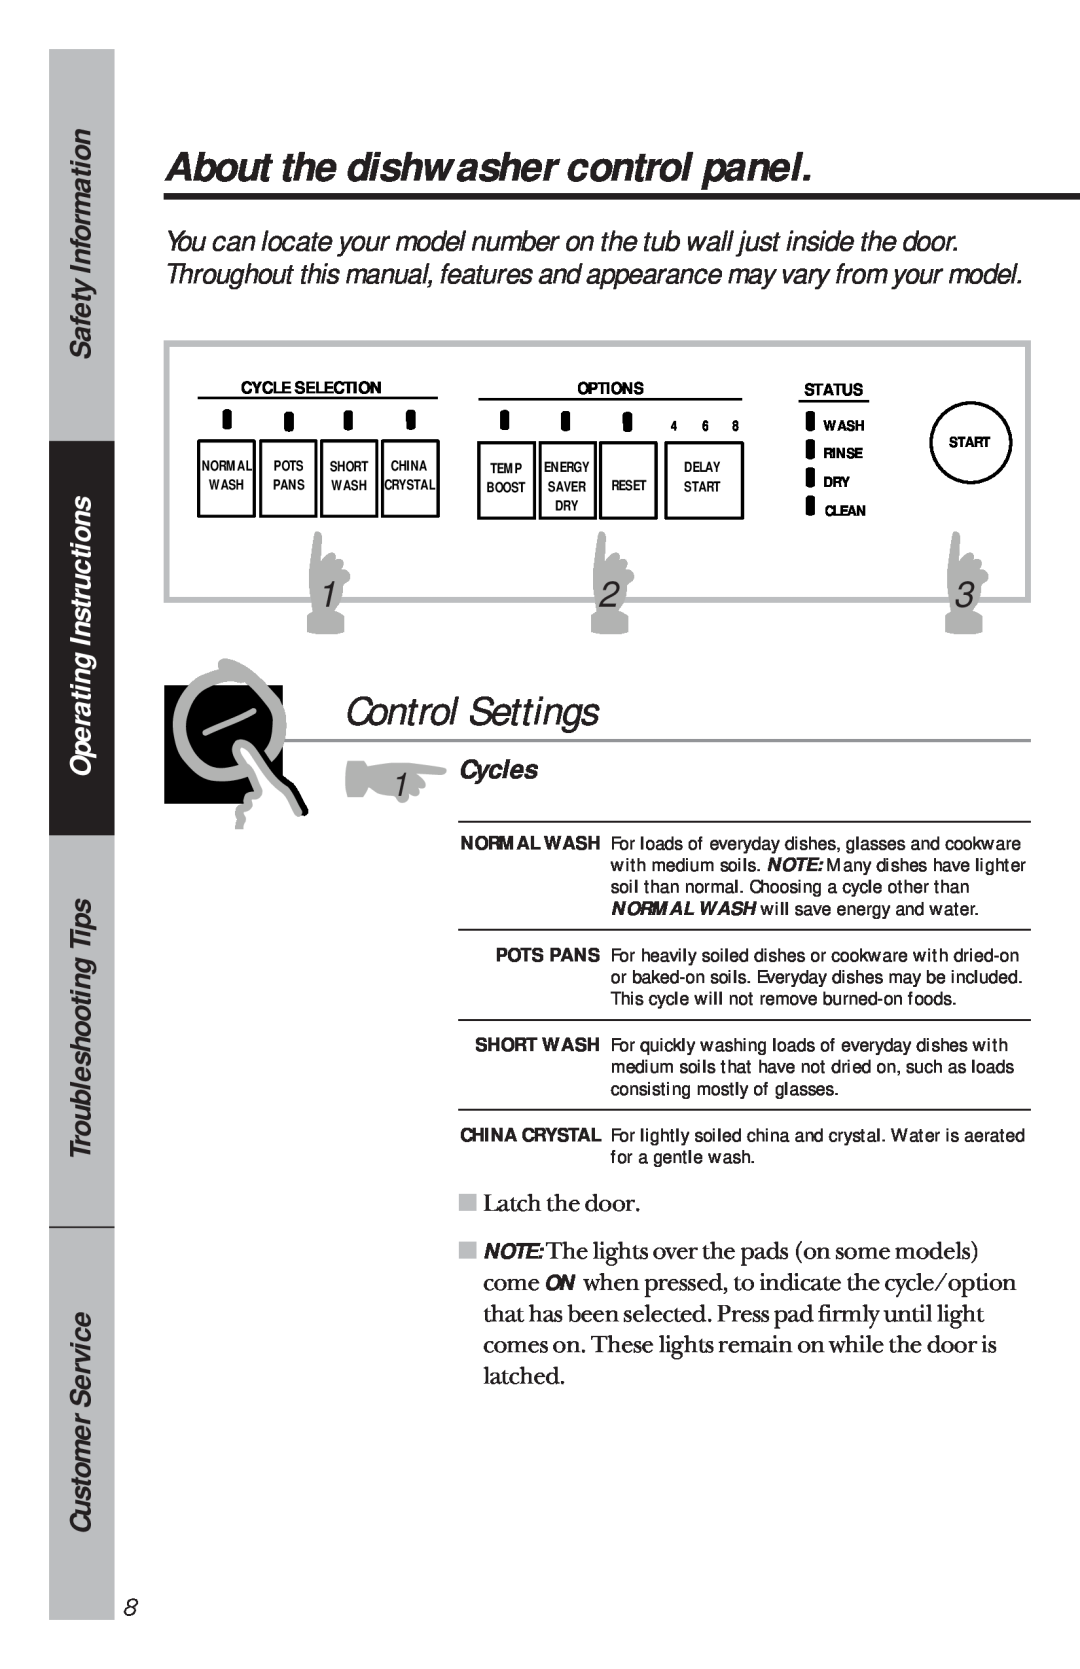 GE GSD4210 About the dishwasher control panel, Control Settings, Safety Information, Operating Instructions, Cycles, Wash 